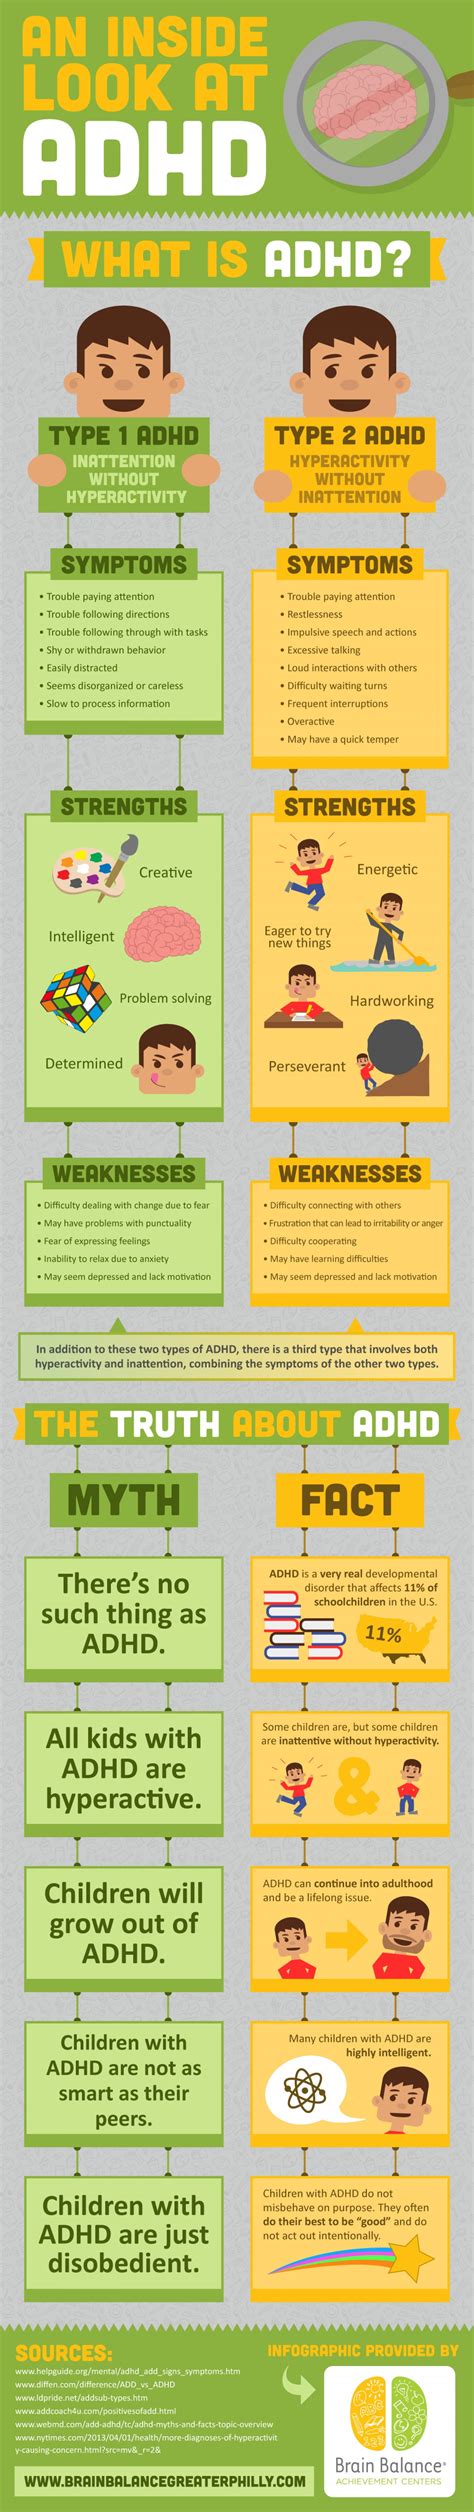 Common Remmedies For Treating Add And Adhd Infographic